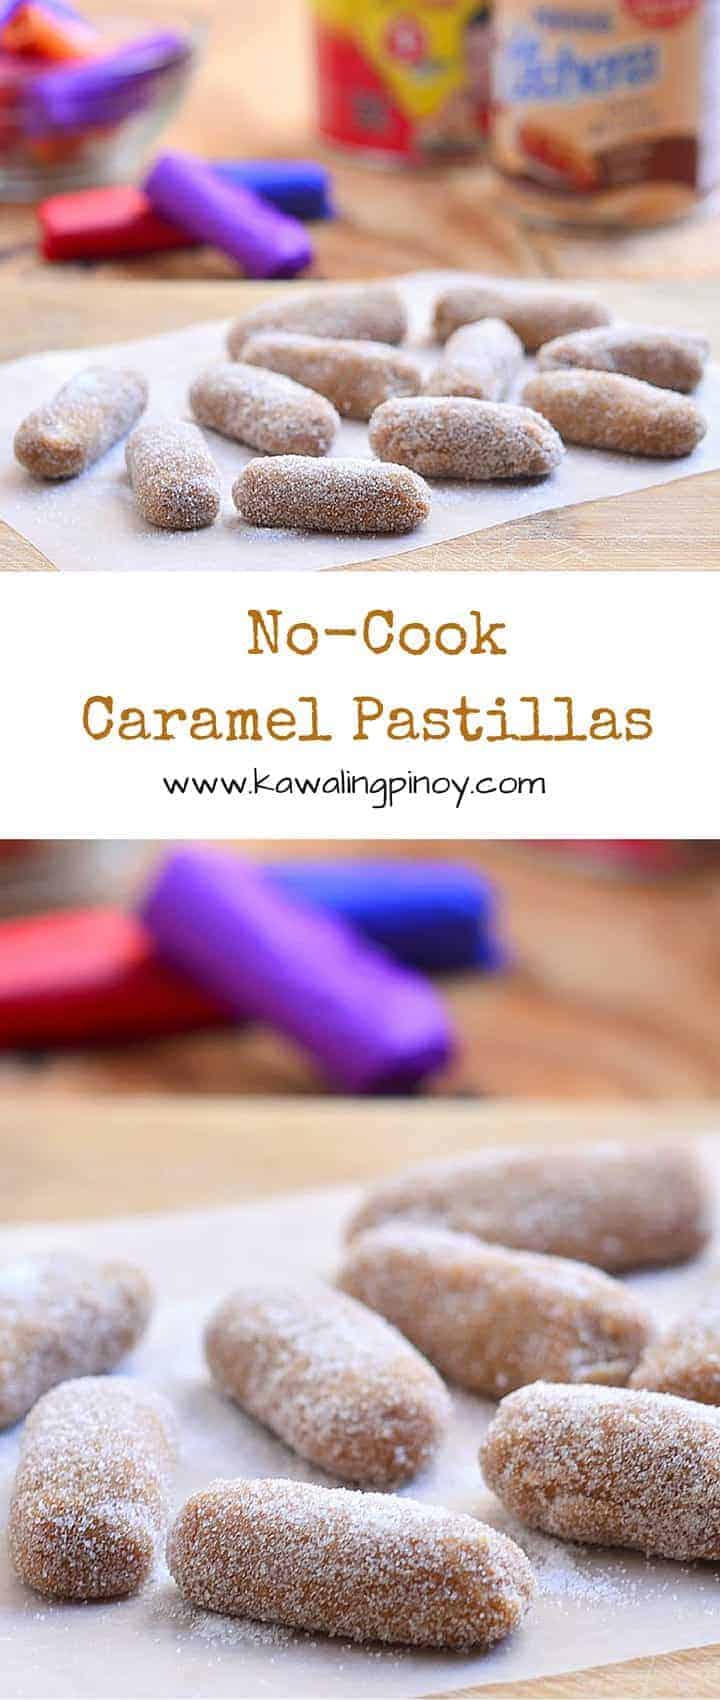 Made with dulce de leche and powdered milk, these No-Cook Caramel Pastillas are seriously addicting. Soft, chewy and delicious, they're quick and easy for anytime cravings